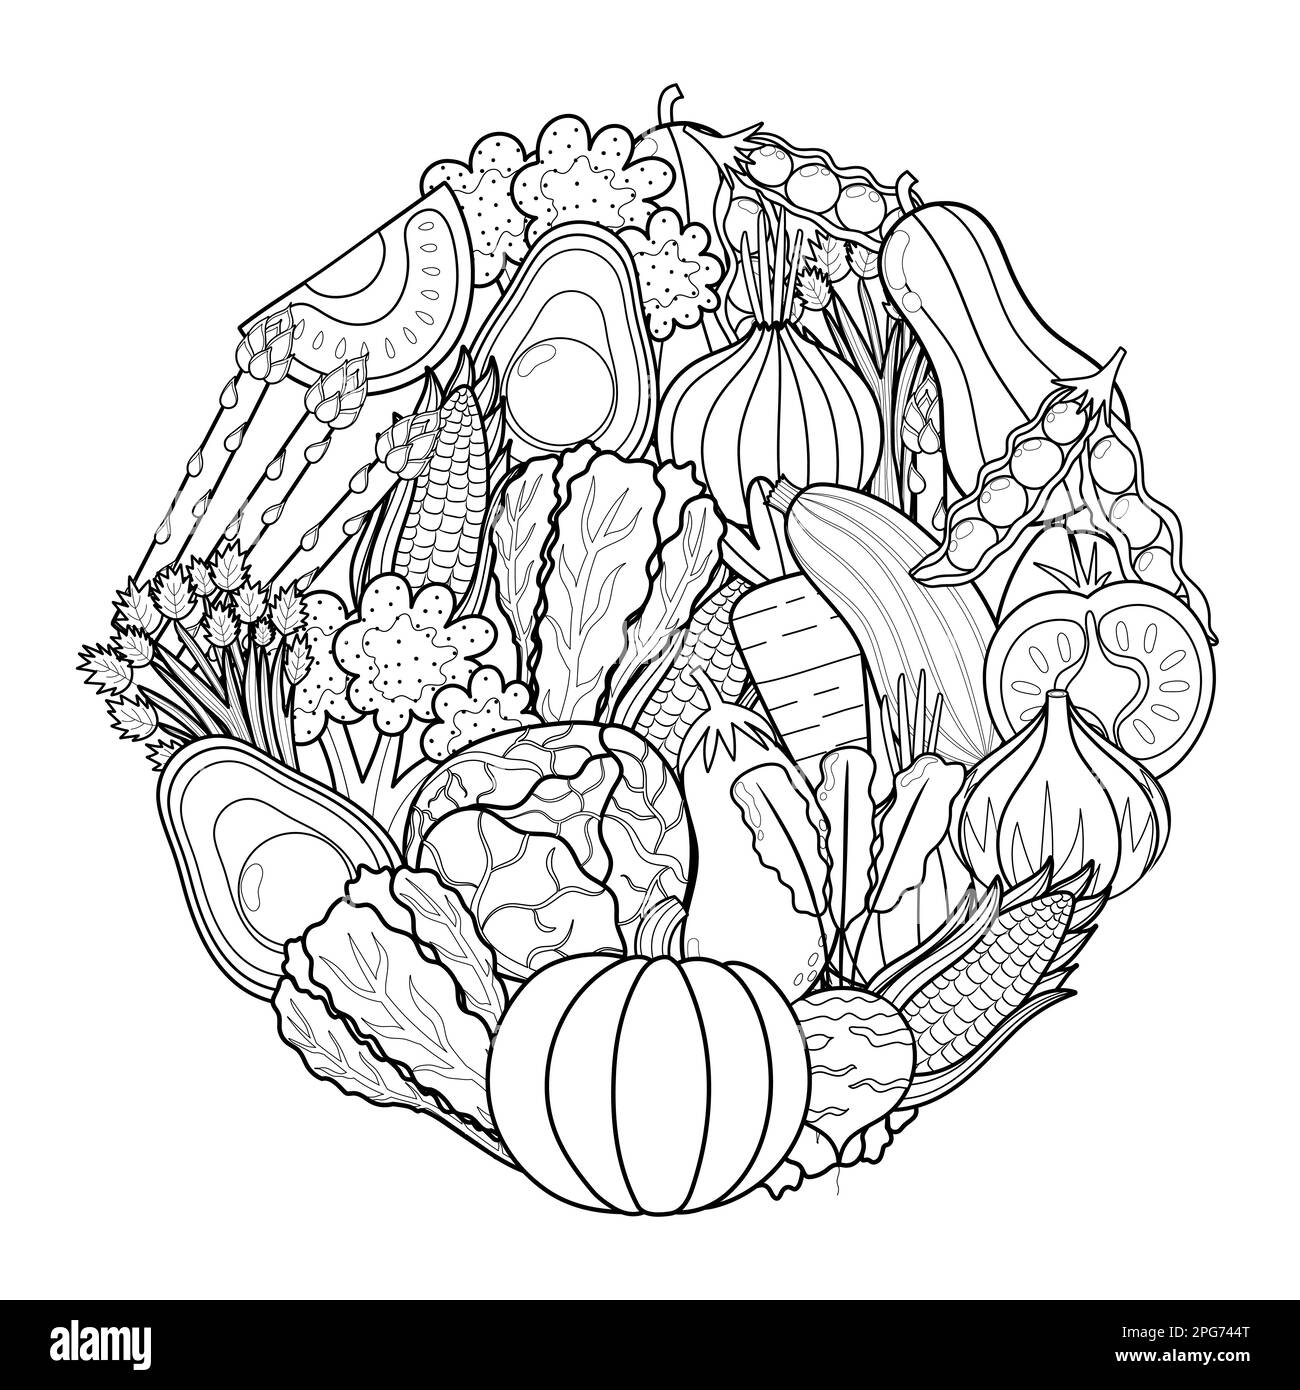 Doodle vegetables circle shape pattern for coloring book Stock Vector